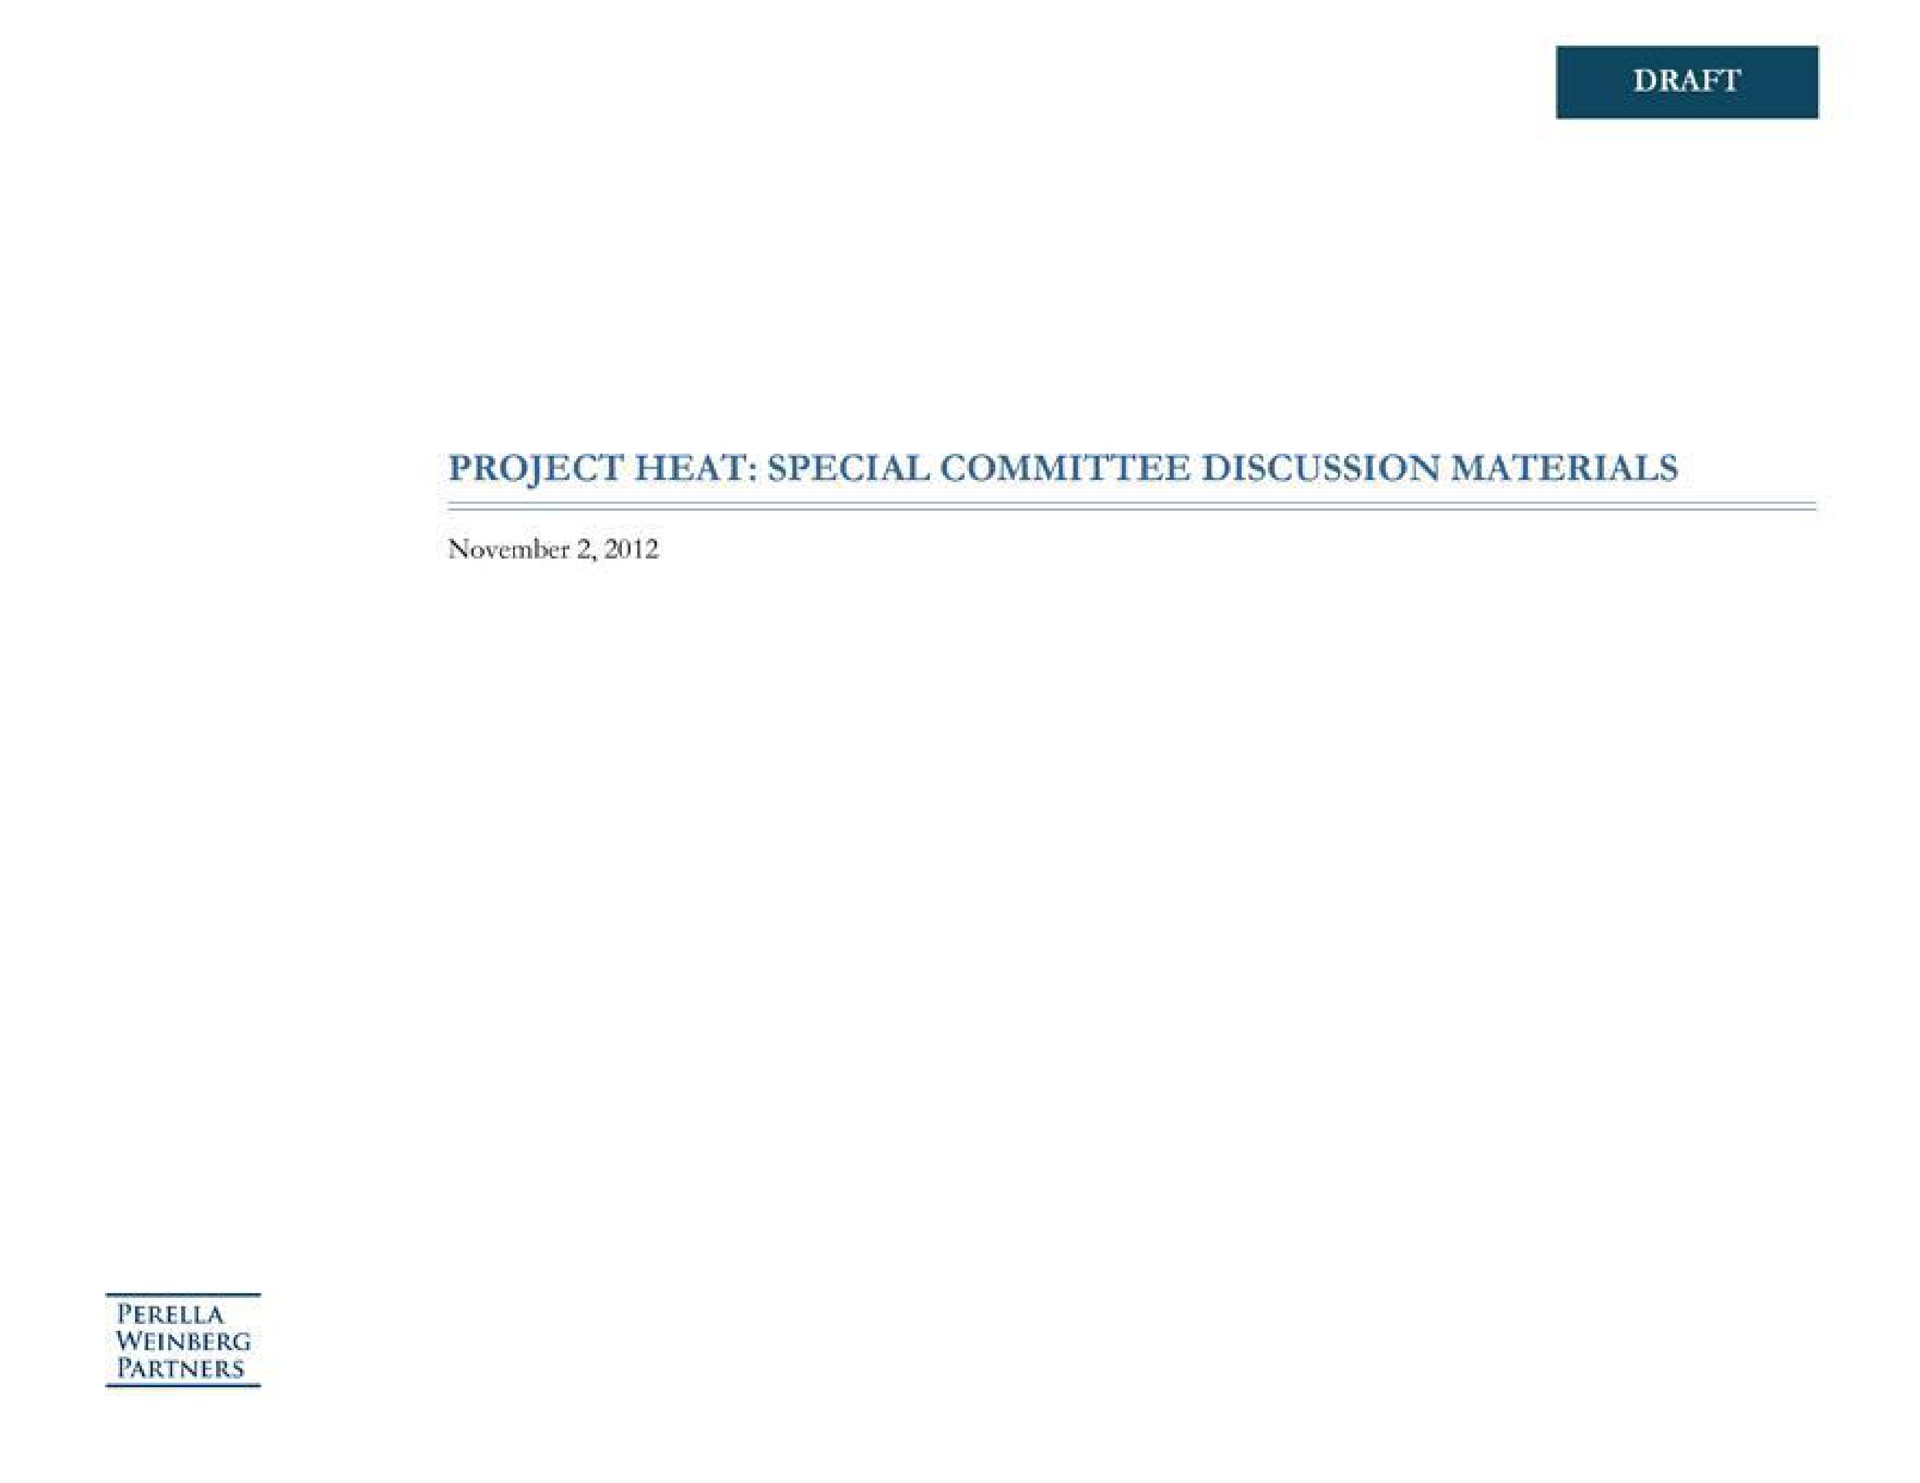 draft project heat special committee discussion materials partners | Perella Weinberg Partners